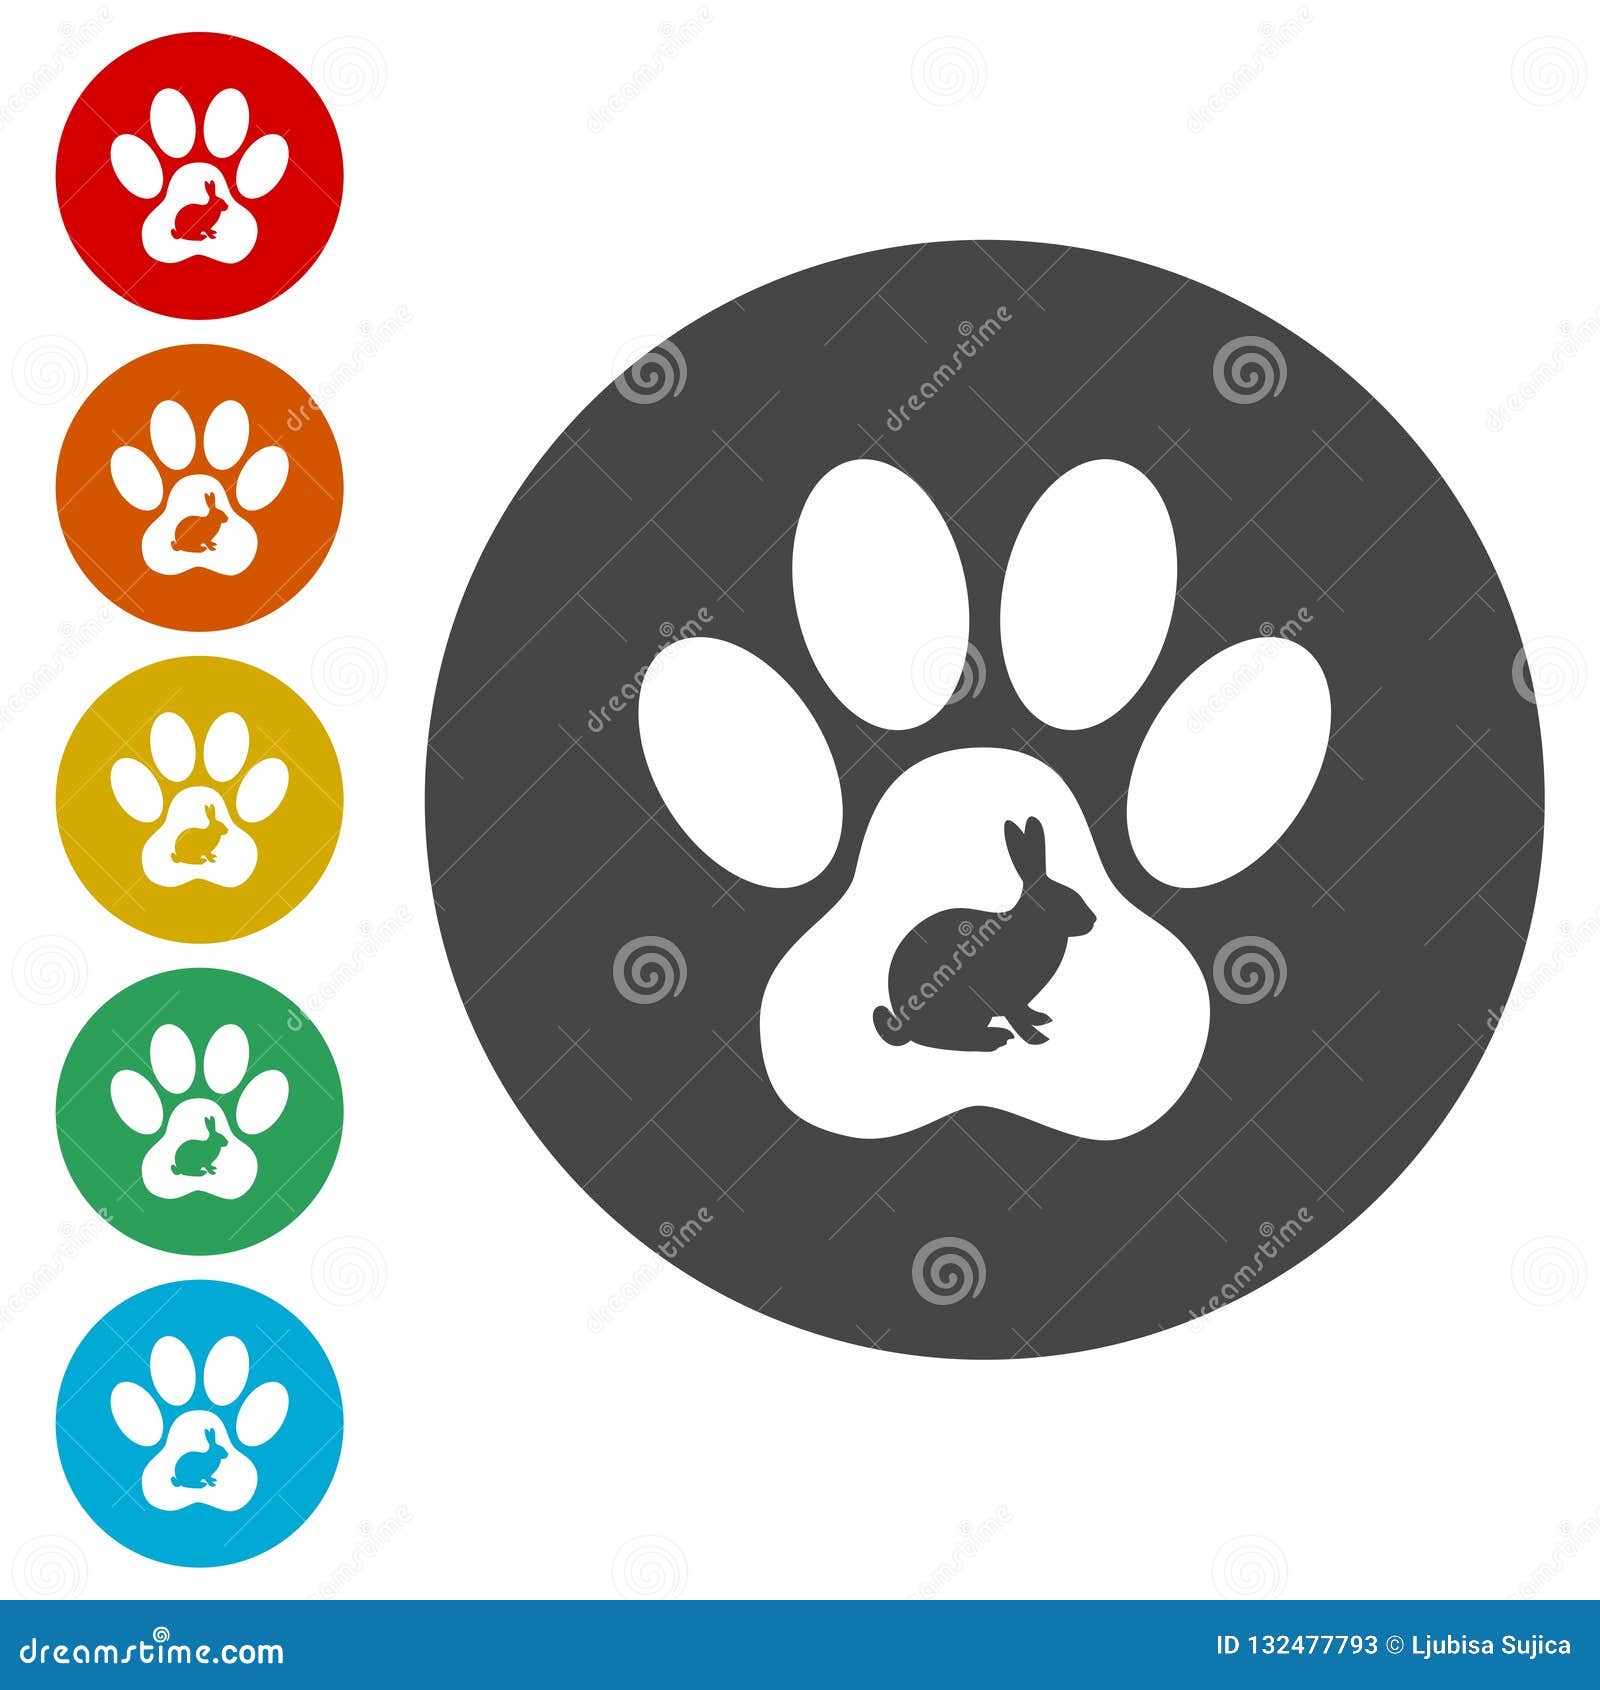 Bunny Paw Print Svg Free - 111+ DXF Include